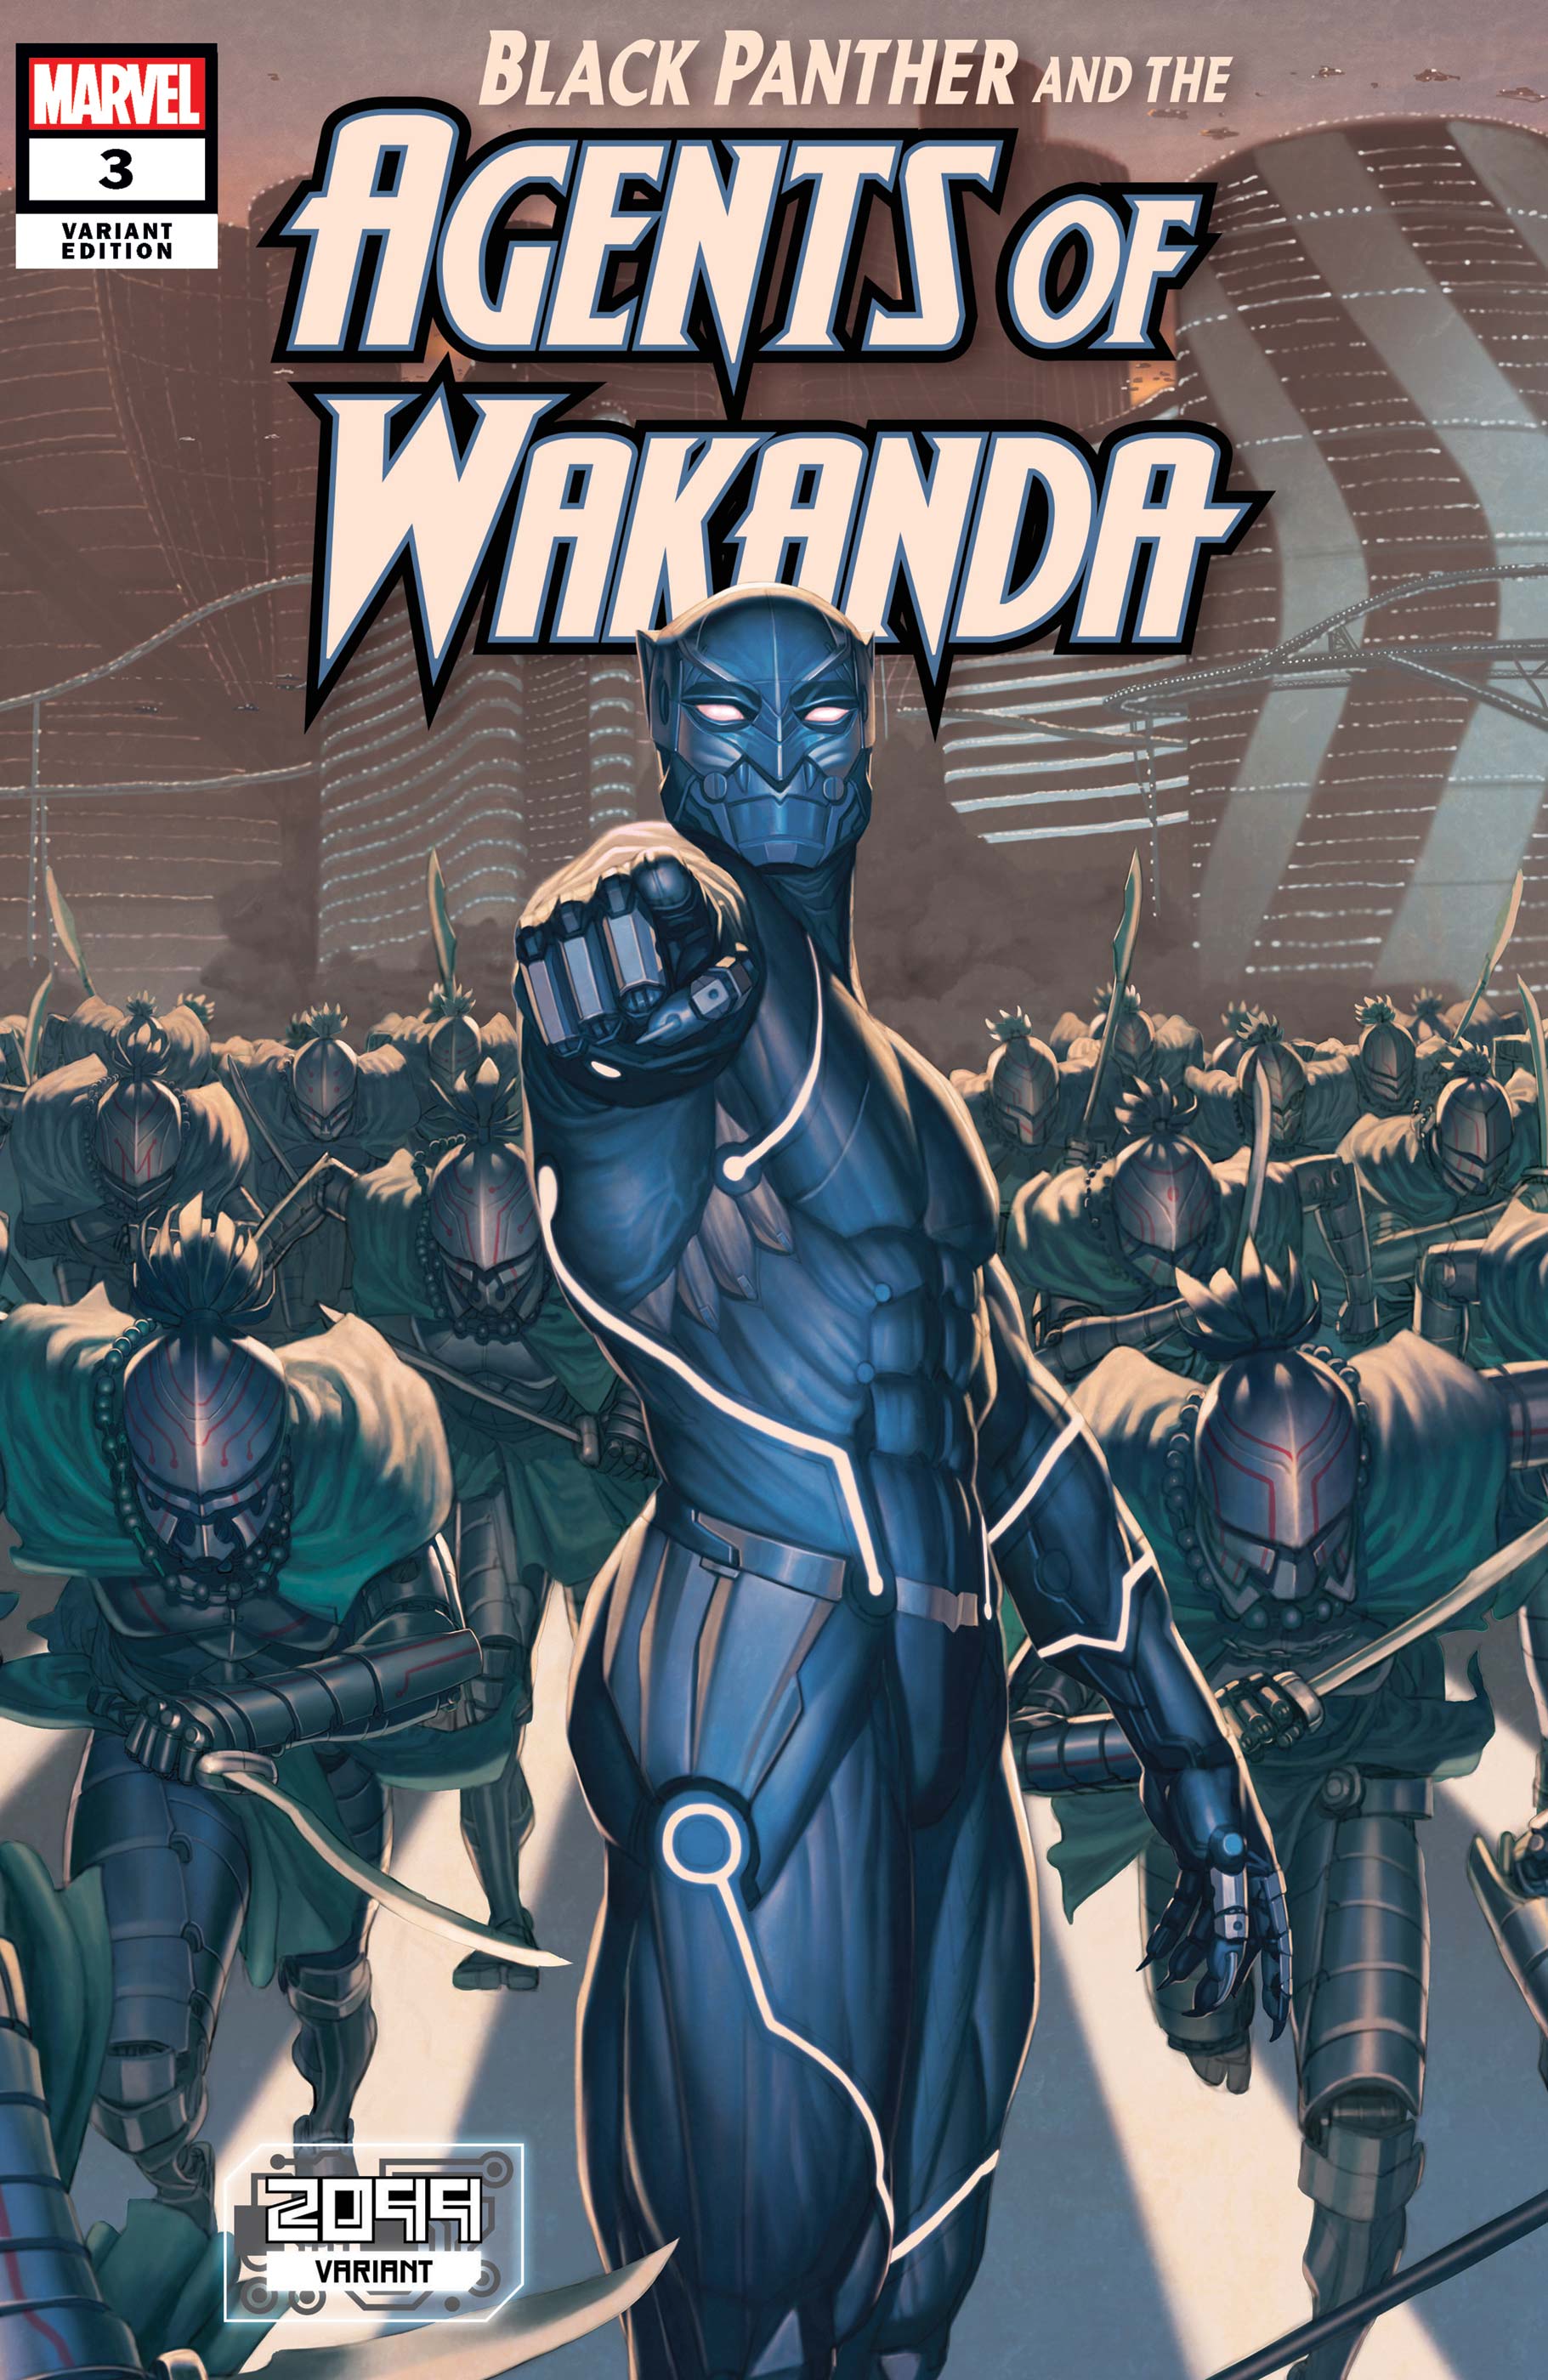 Black Panther and the Agents of Wakanda (2019) #3 (Variant)